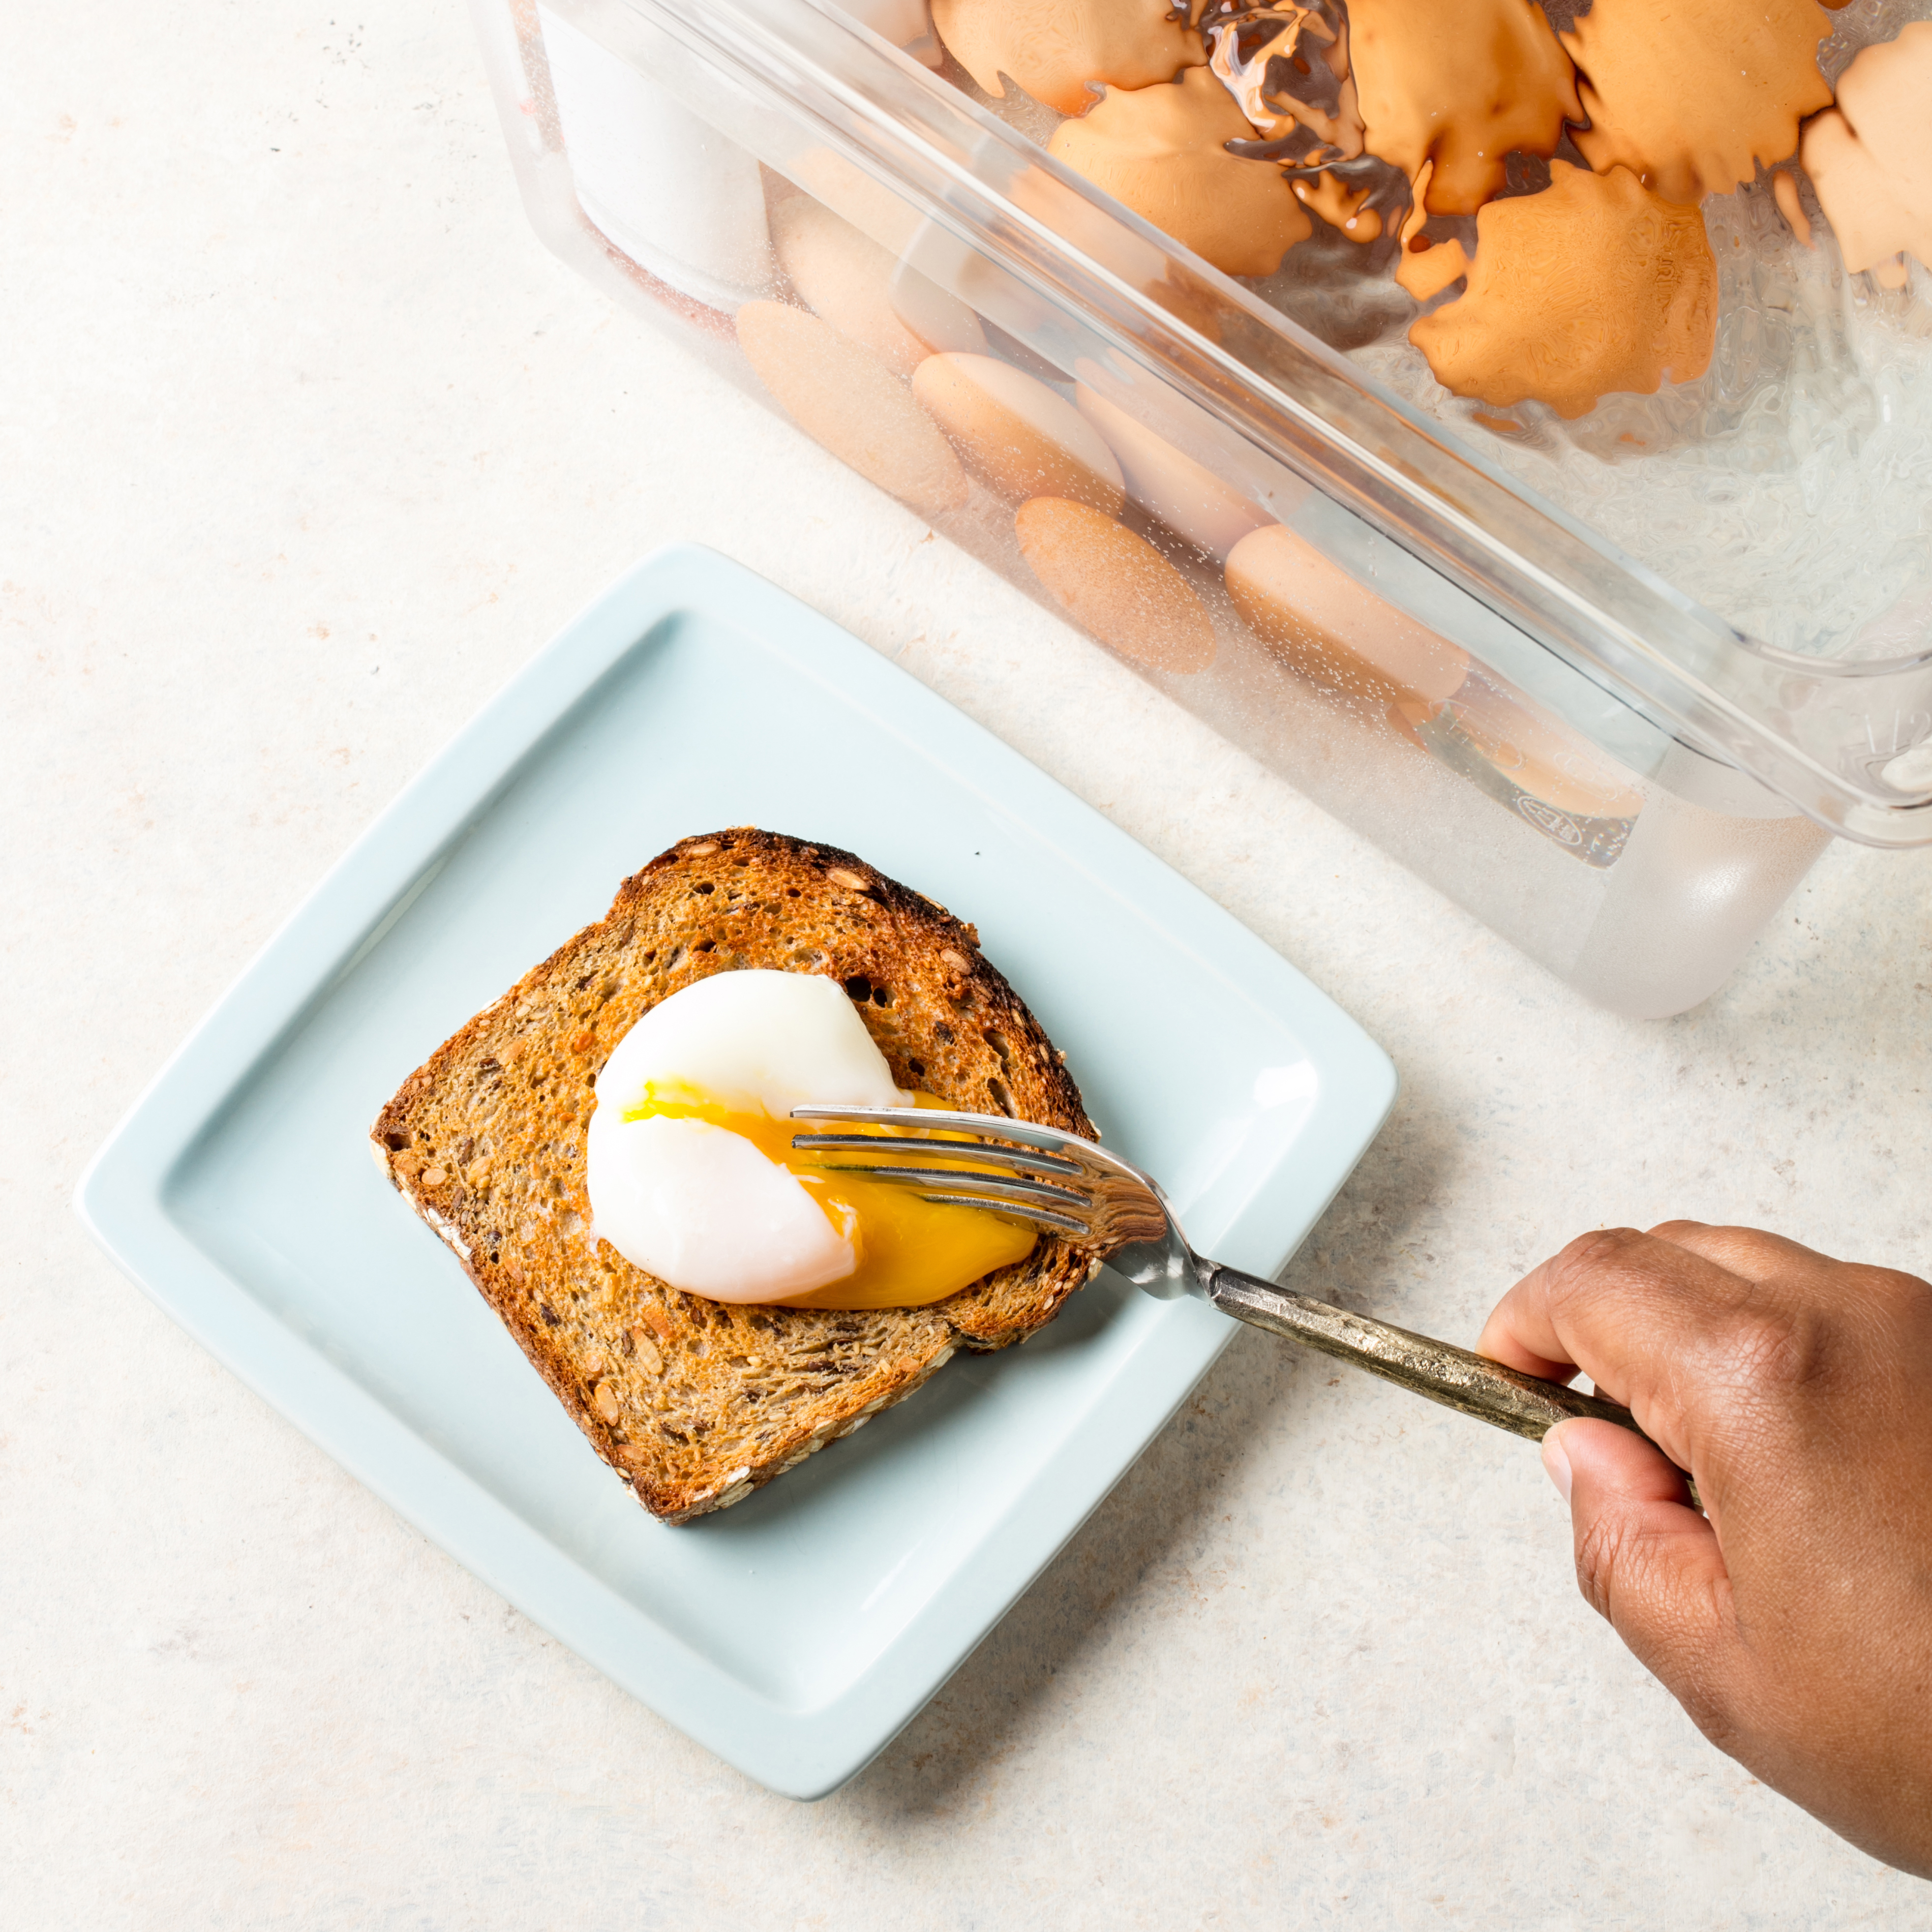 Sous Vide Poached Eggs Recipe - Savoring The Good®